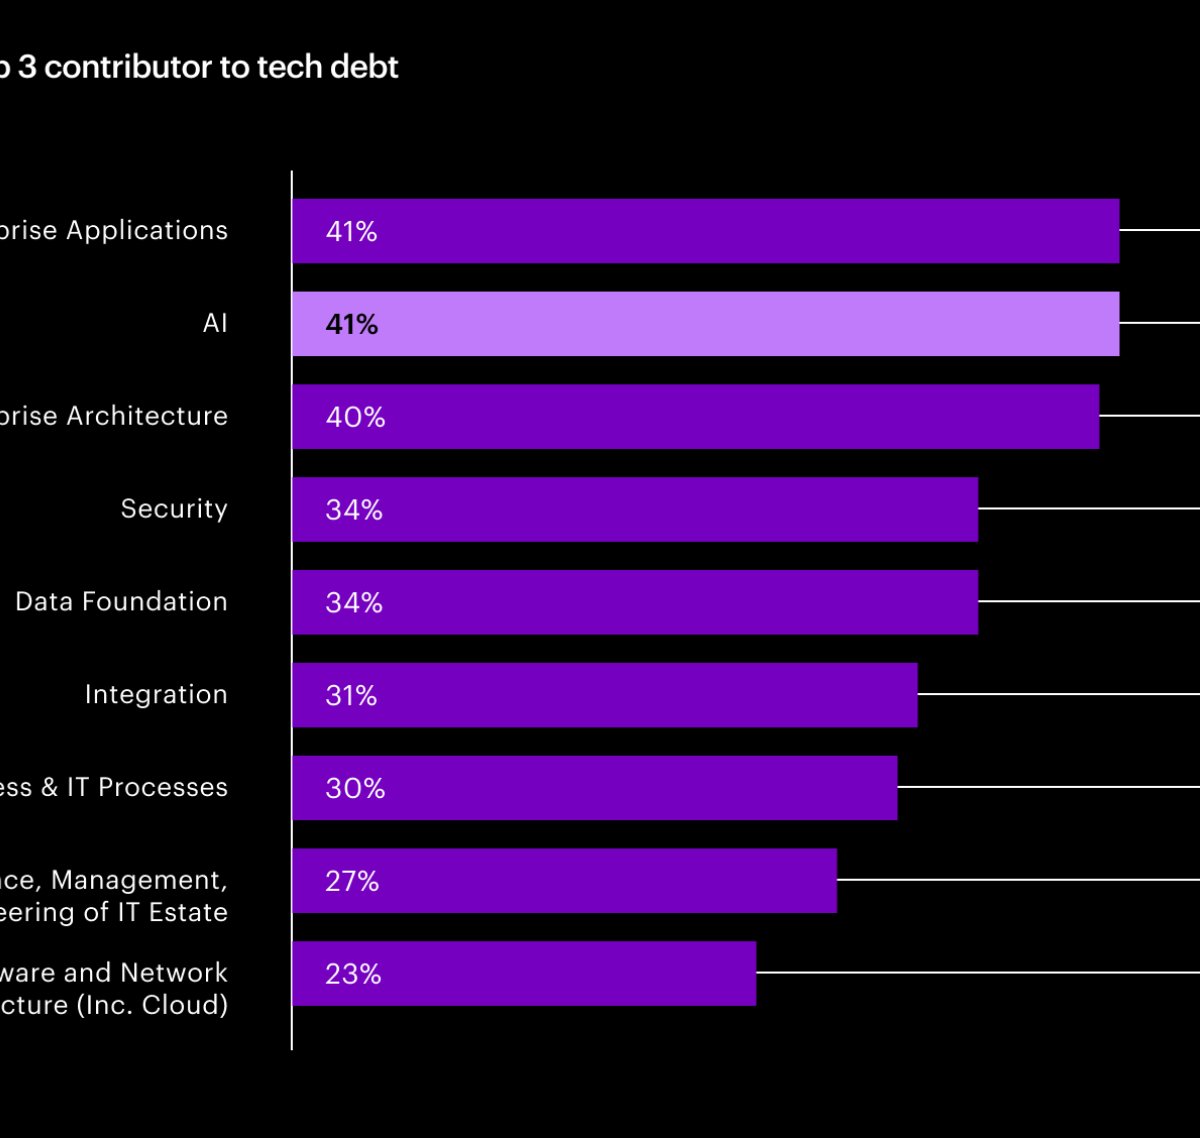 AI is the highest contributor to tech debt, tied with applications.